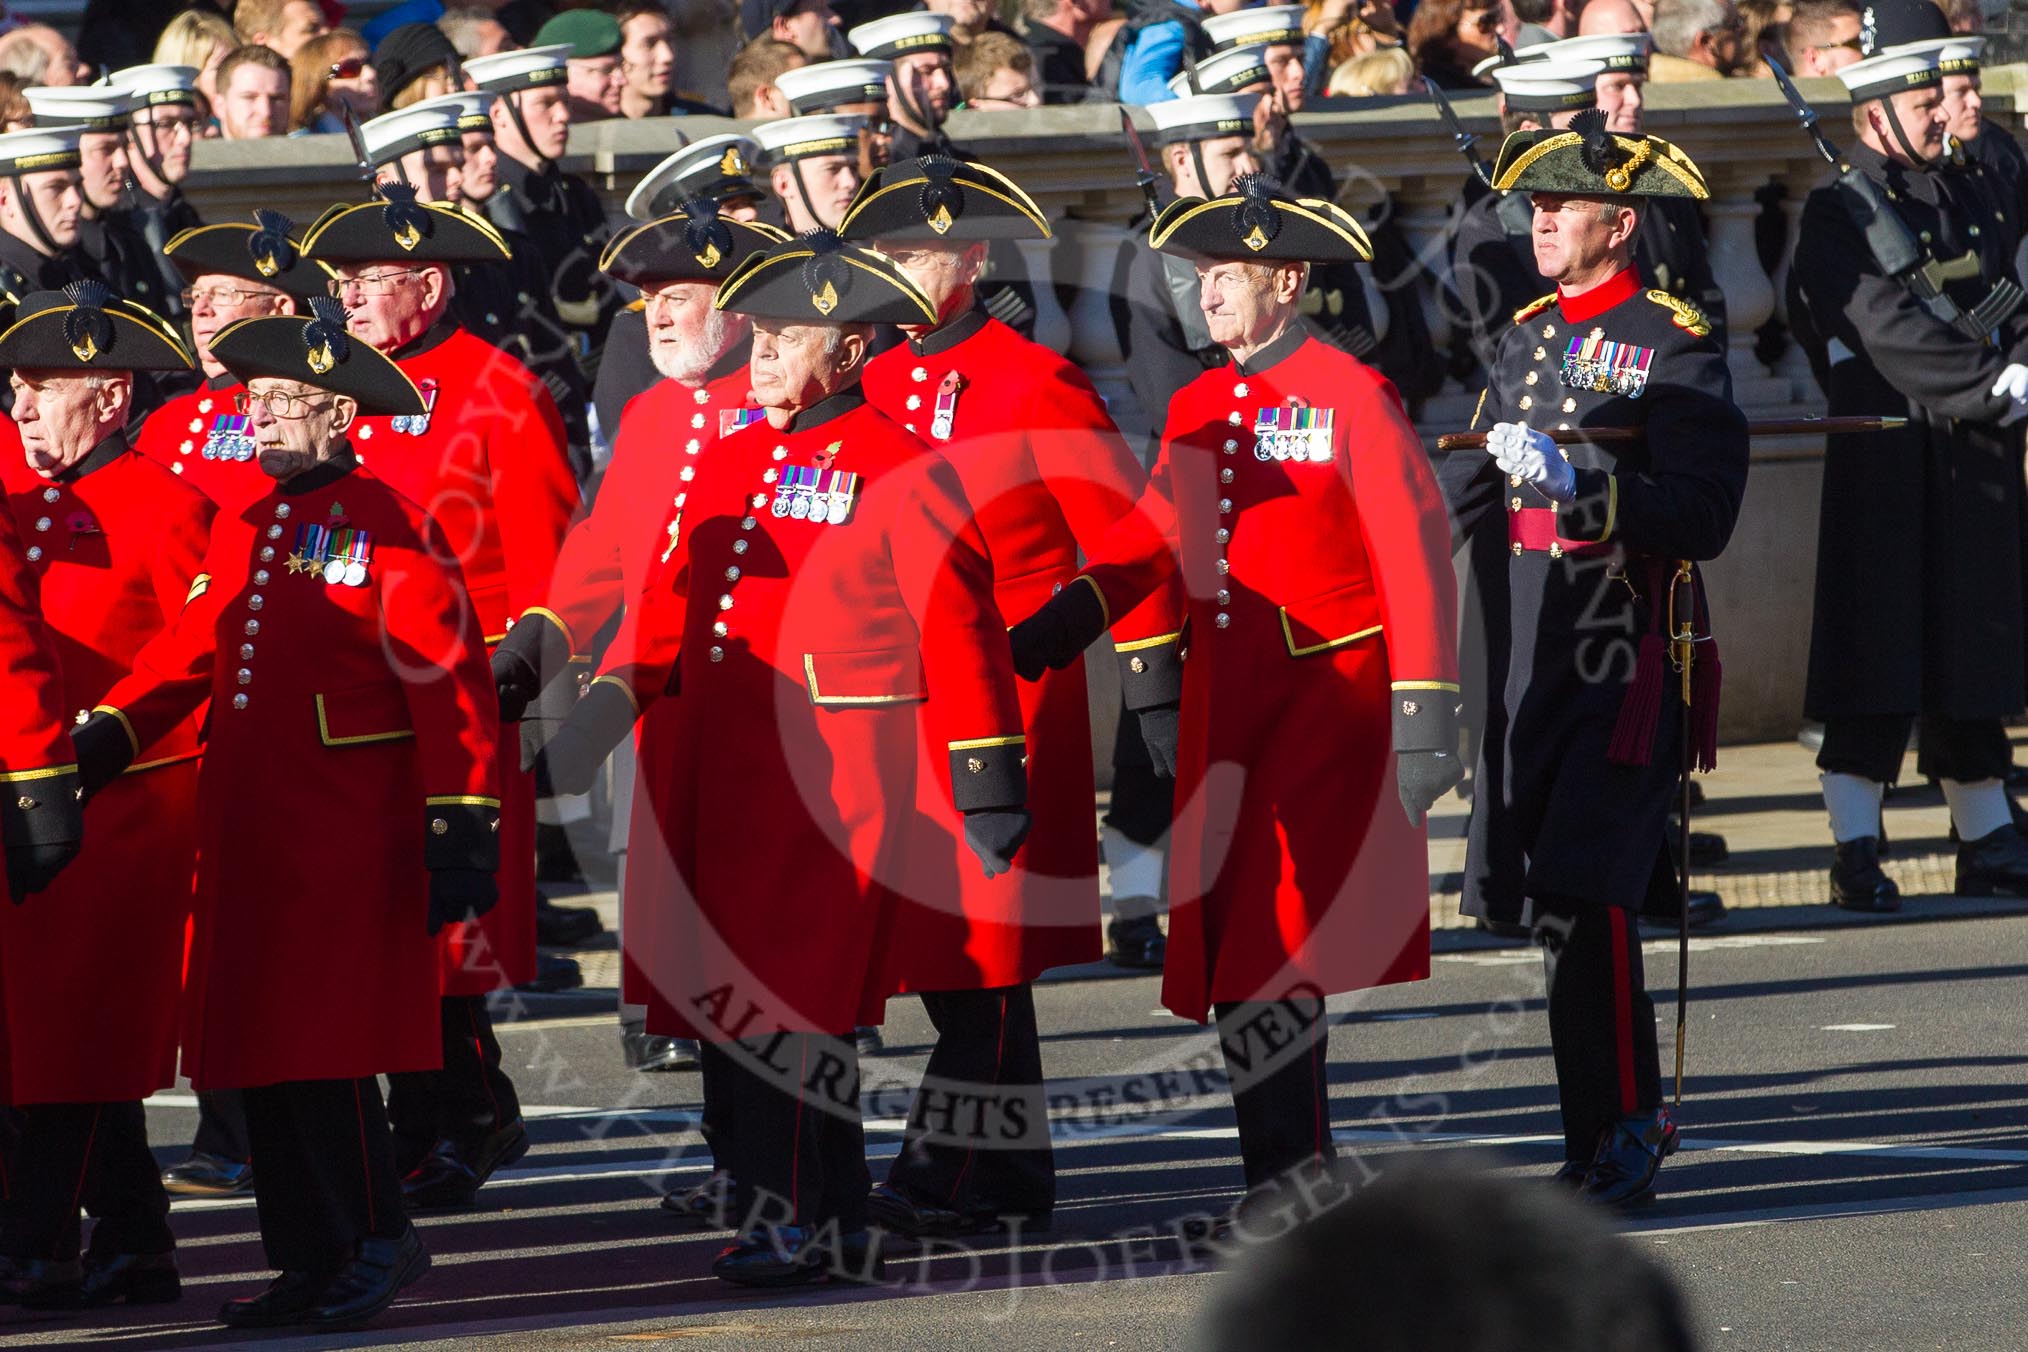 Remembrance Sunday 2012 Cenotaph March Past: Group E43 - Royal Hospital, Chelsea (Chelsea Pensioners)..
Whitehall, Cenotaph,
London SW1,

United Kingdom,
on 11 November 2012 at 11:44, image #344